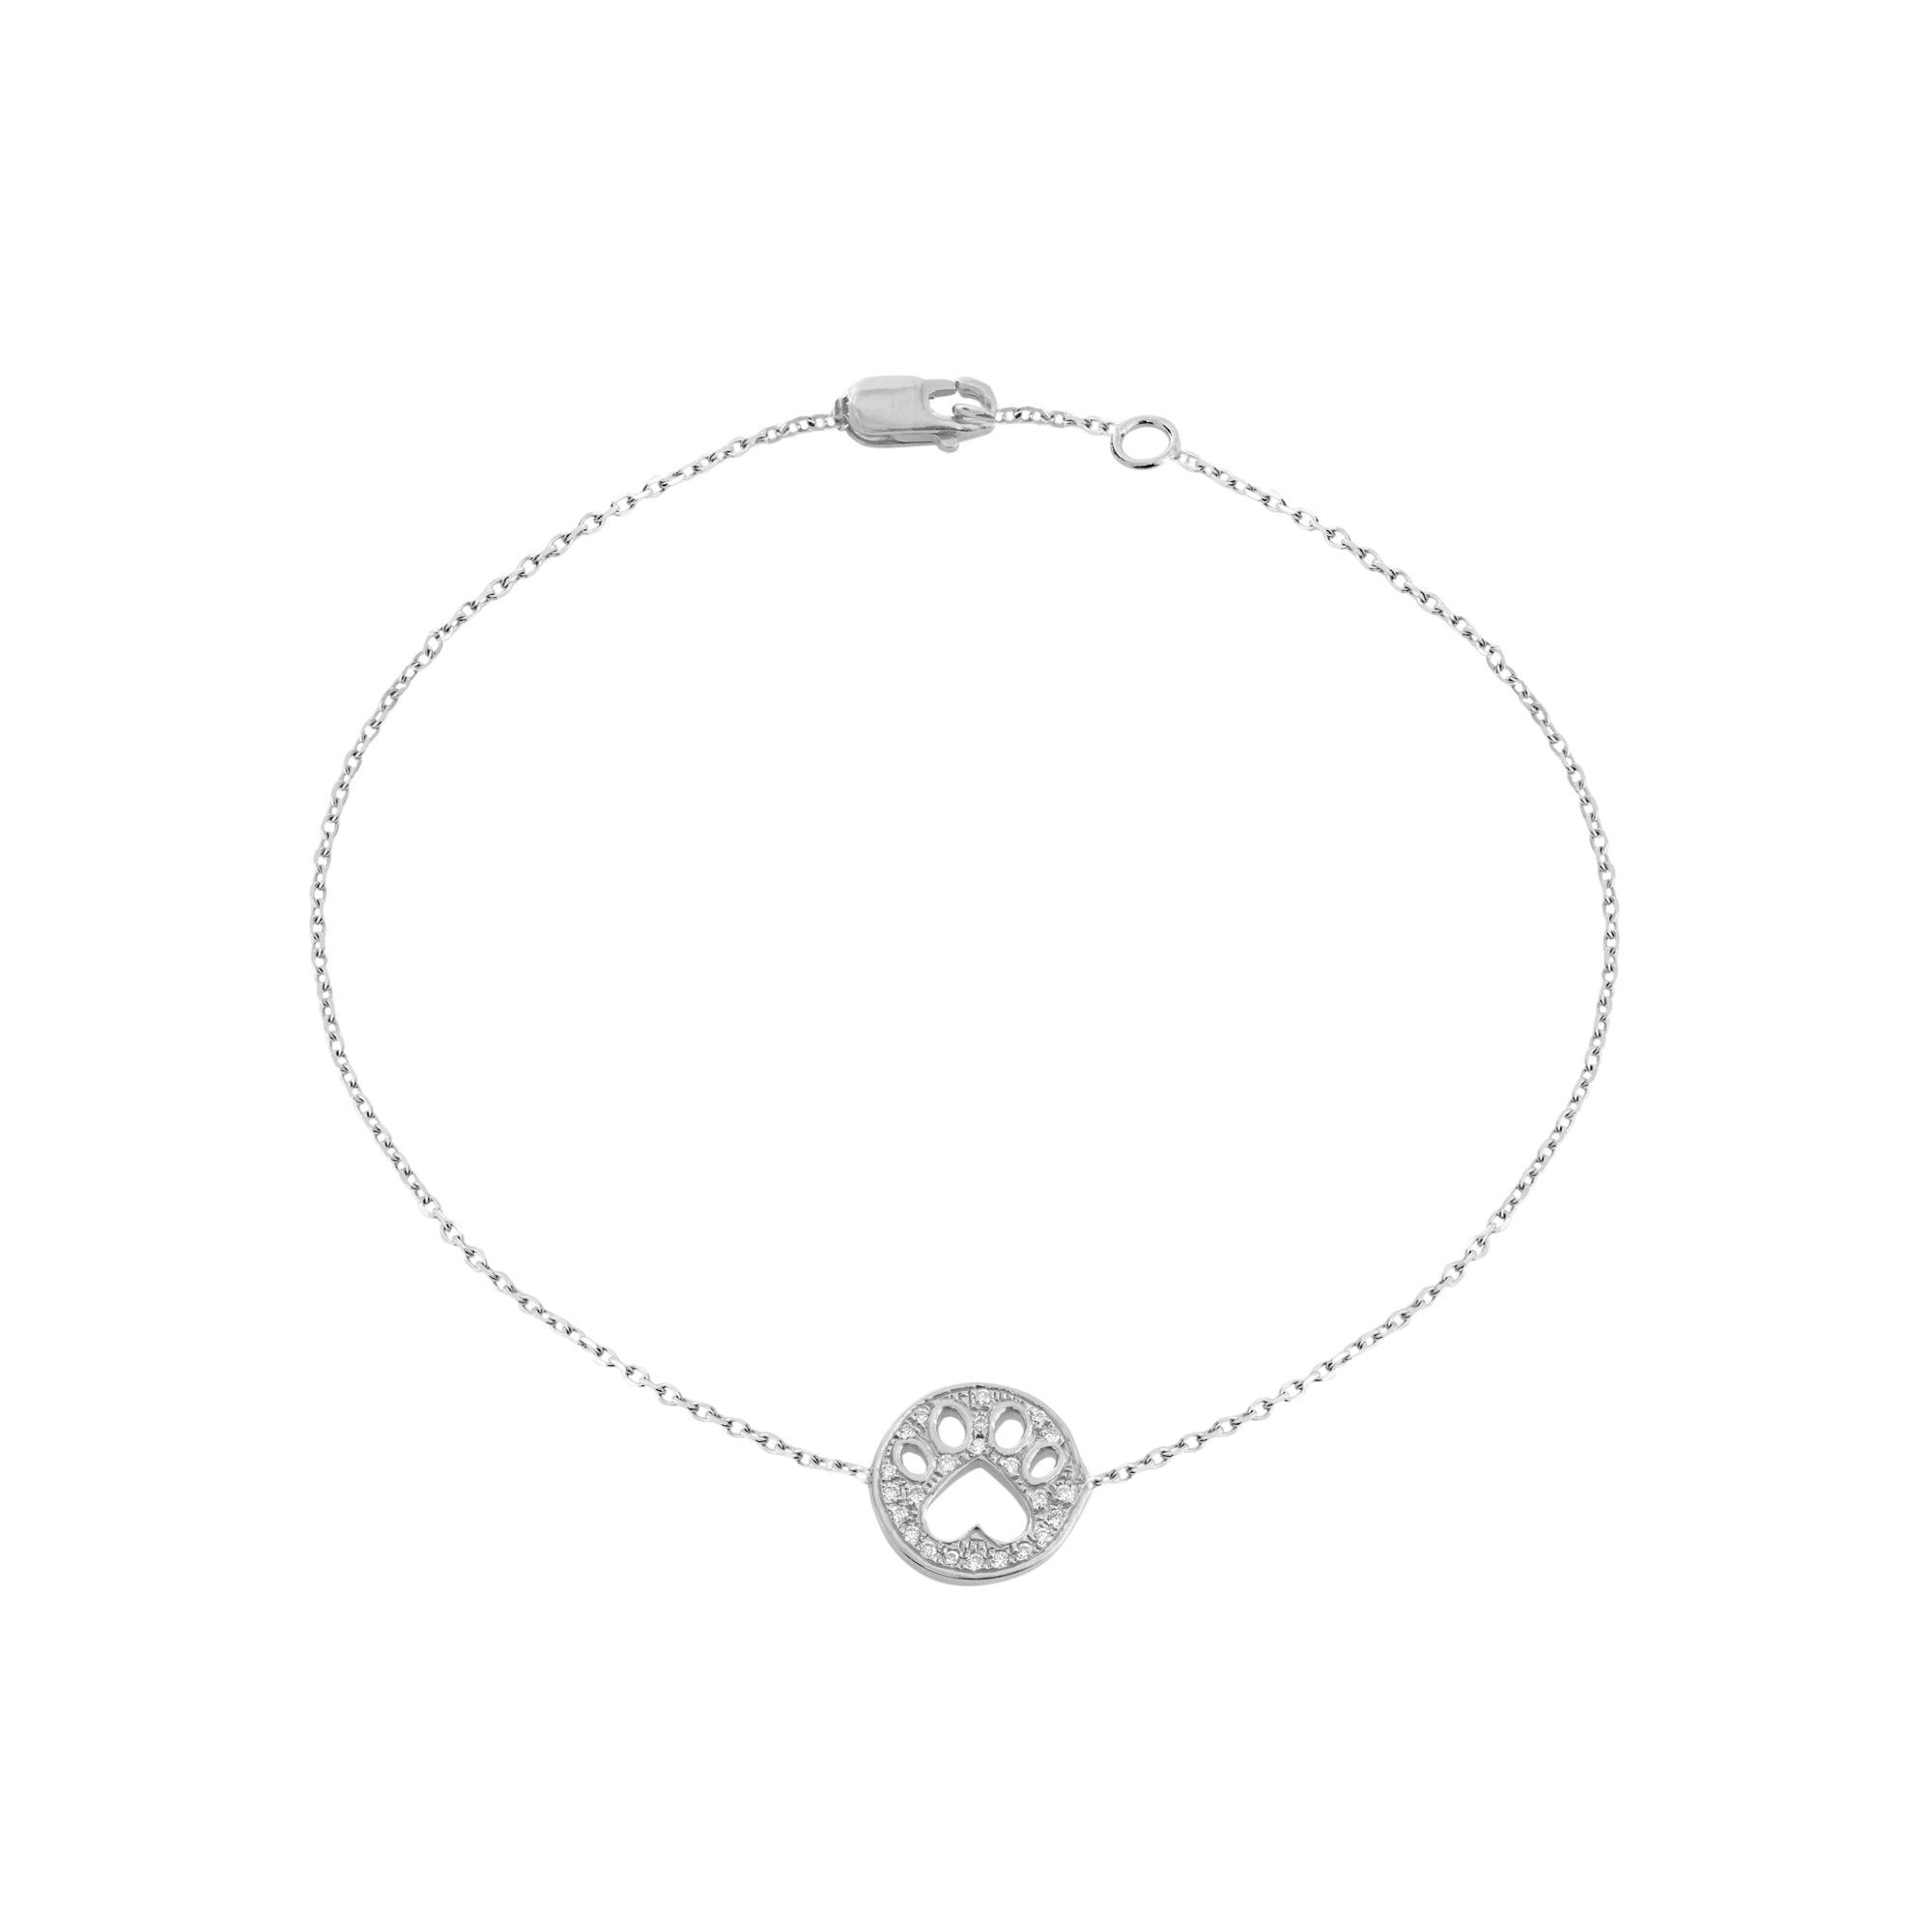 Our Cause for Paws 14k Gold and Diamond Mini Paw Bracelet